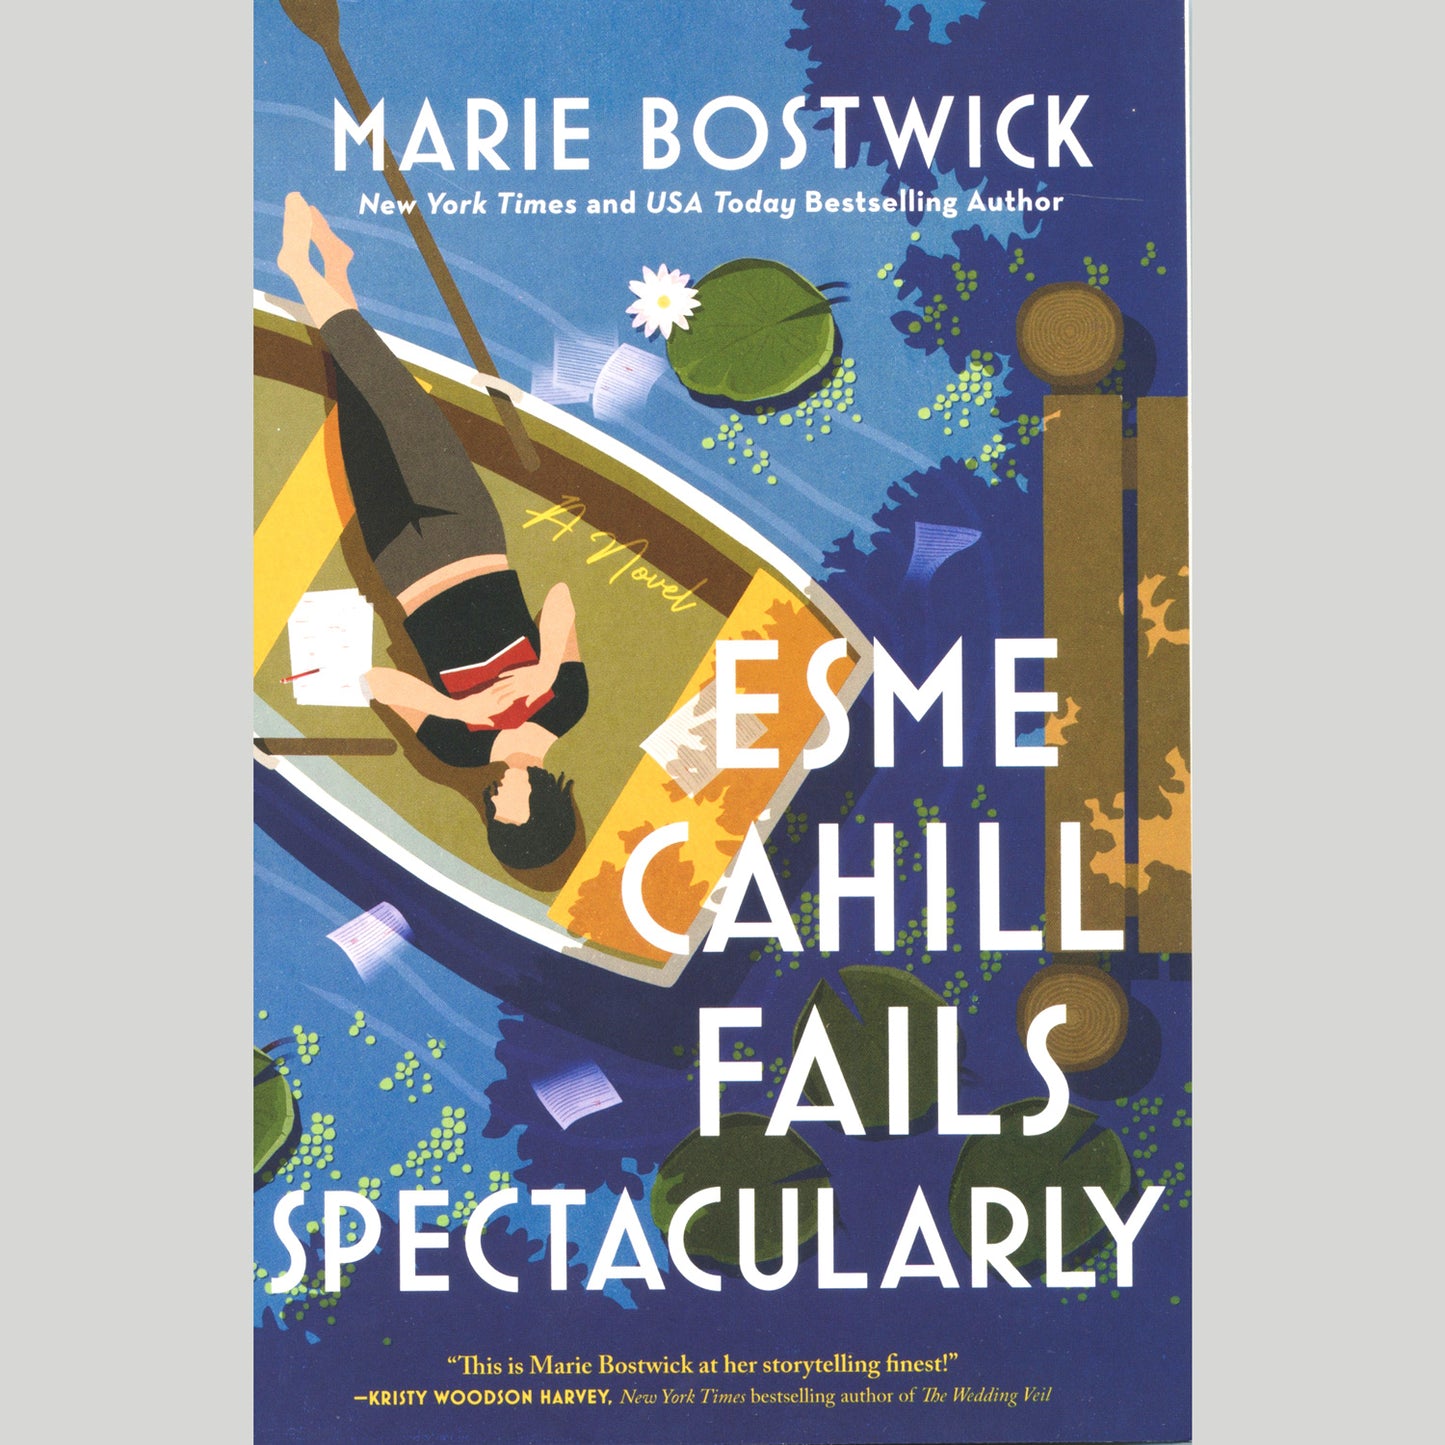 Esme Cahill Fails Spectacularly - A Marie Bostwick Novel Primary Image